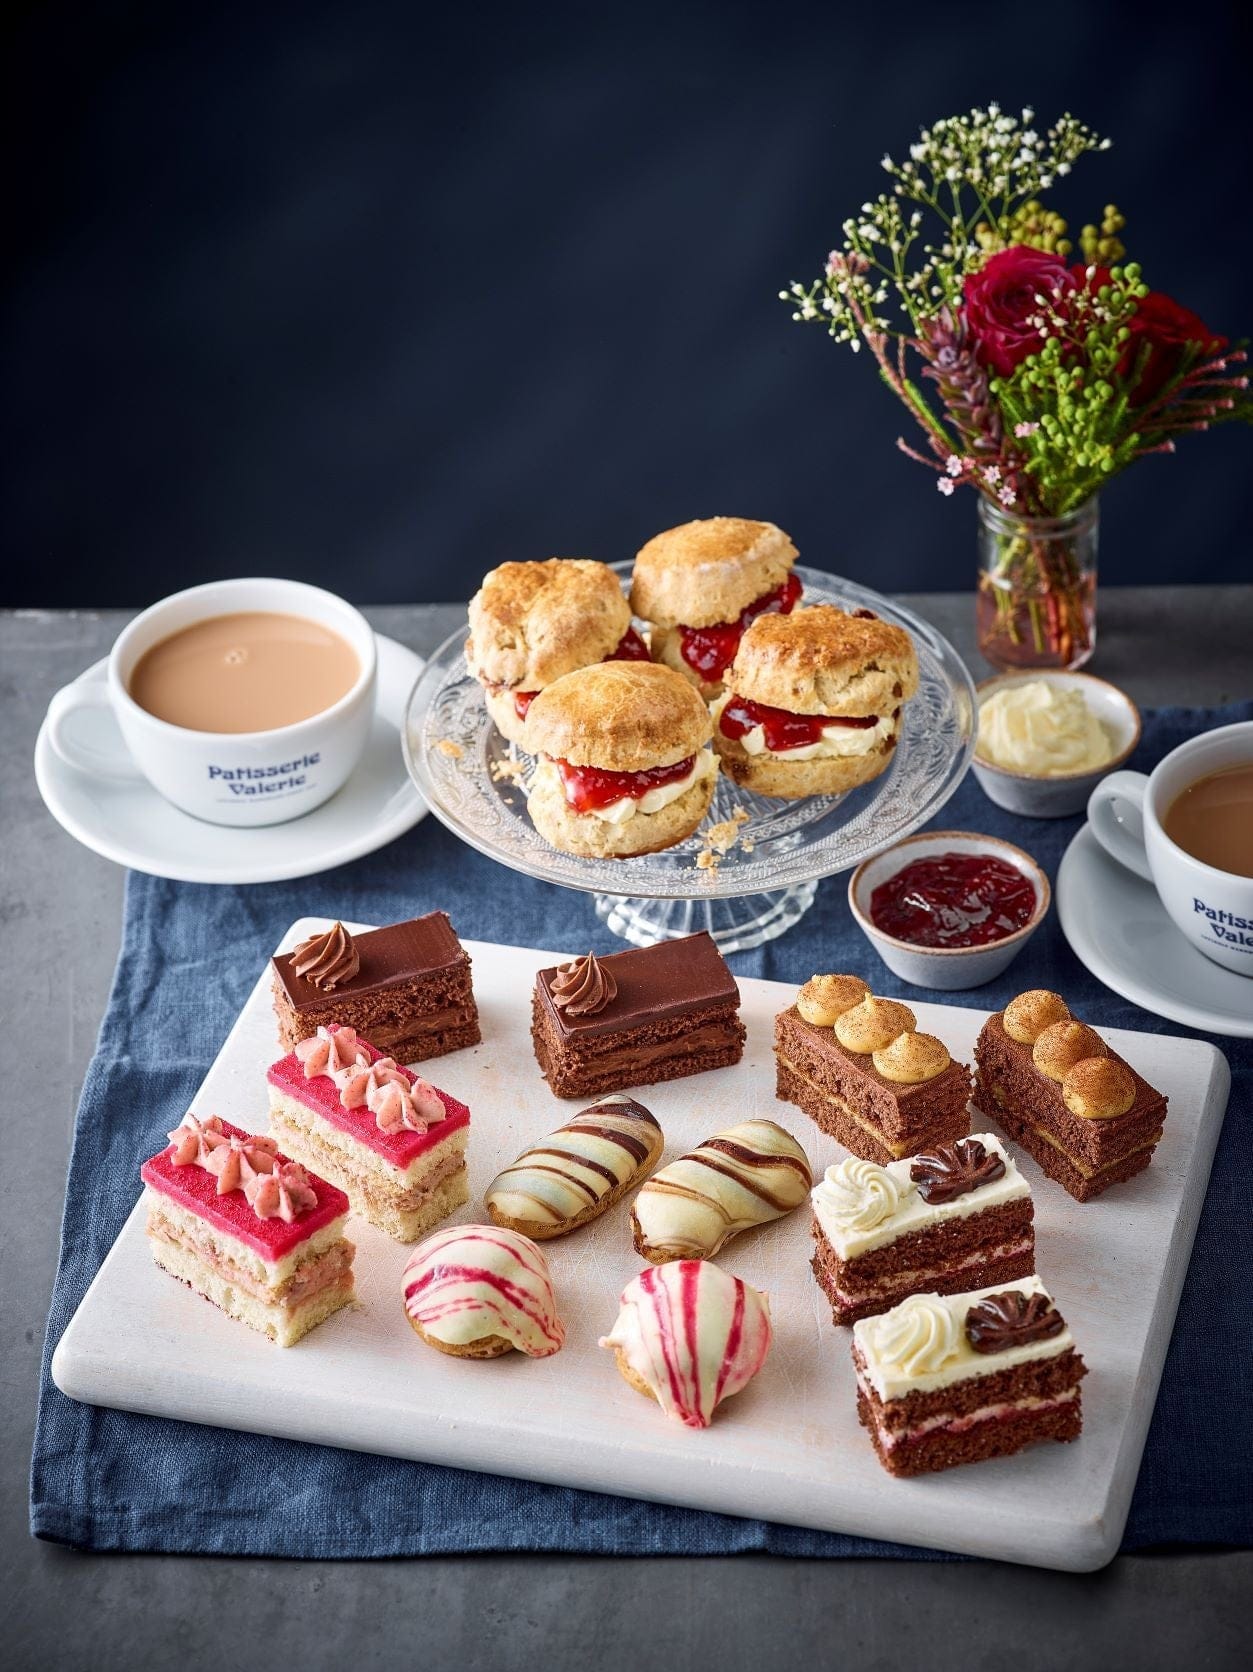 Online Afternoon Tea E-Gift Card - Patisserie Valerie